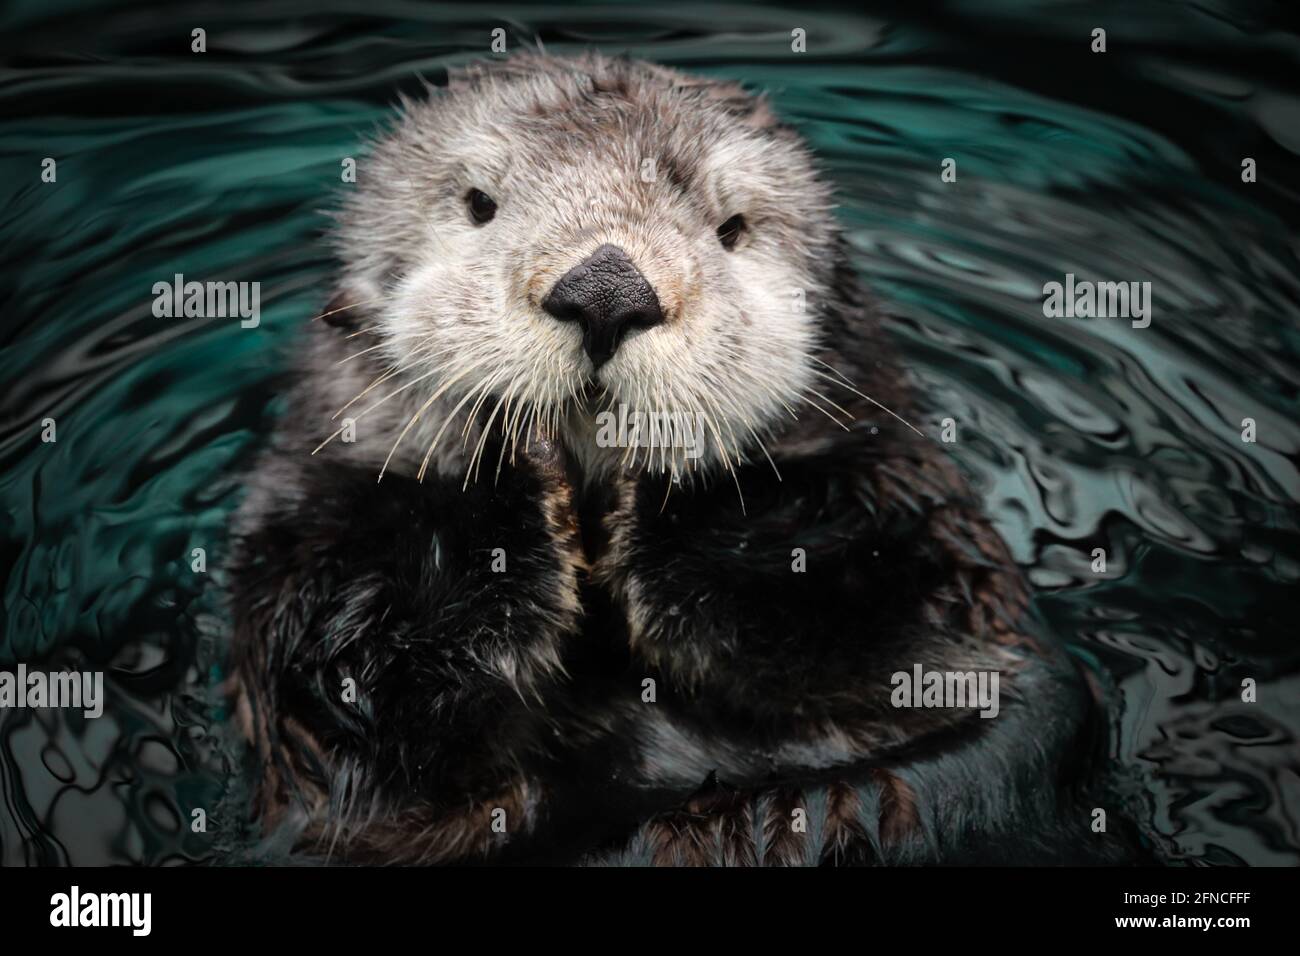 Sea otter posing in the water Stock Photo - Alamy